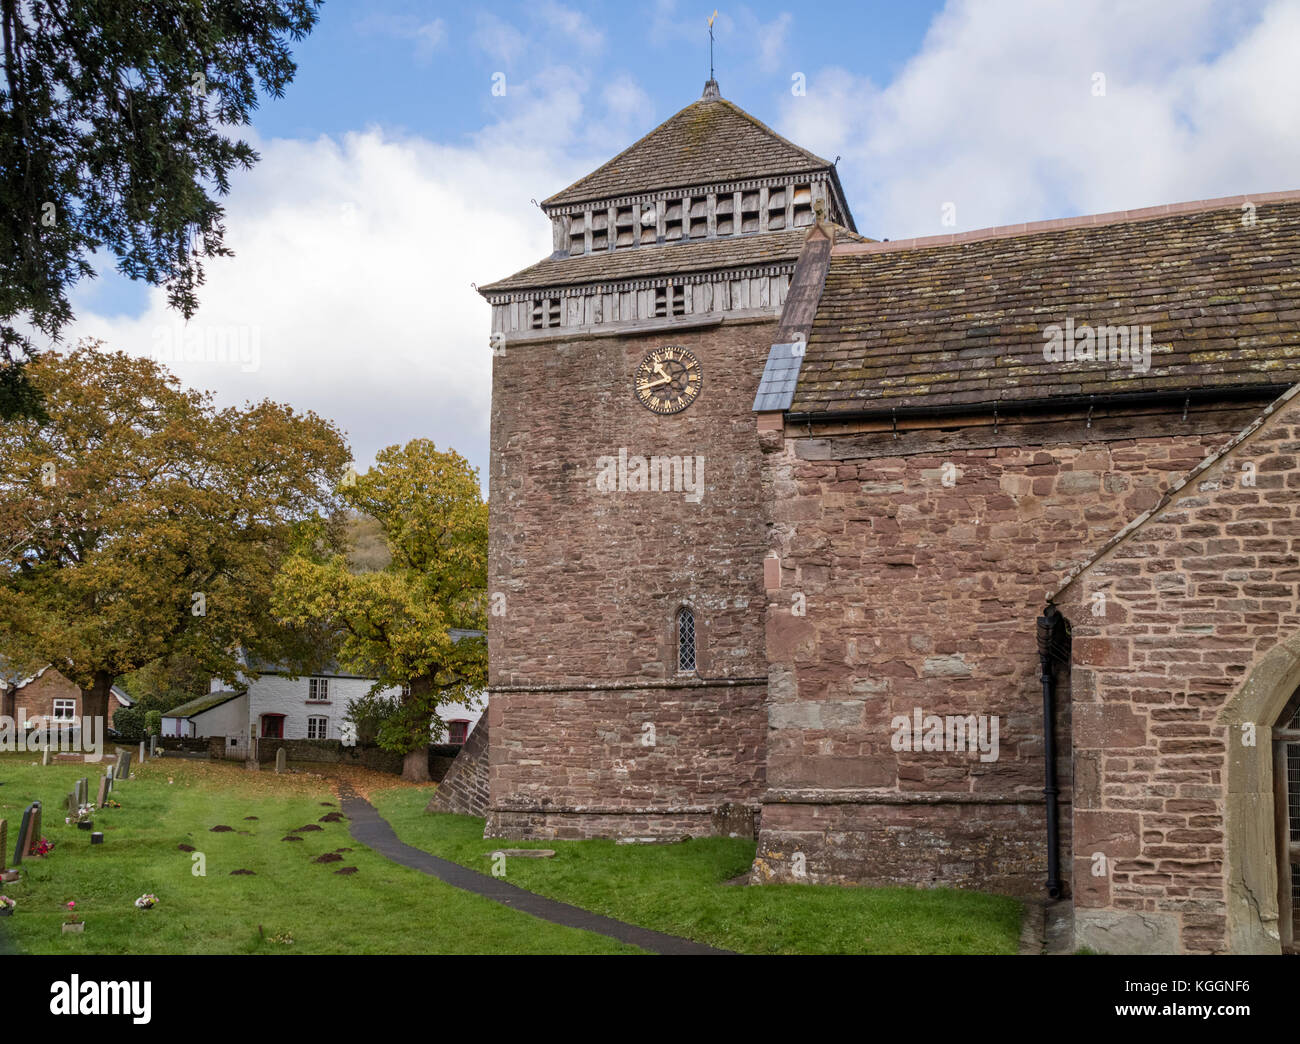 The Church of St Bridget or St Bride in the village of Skenfrith, Monmouthshire, Wales, UK Stock Photo